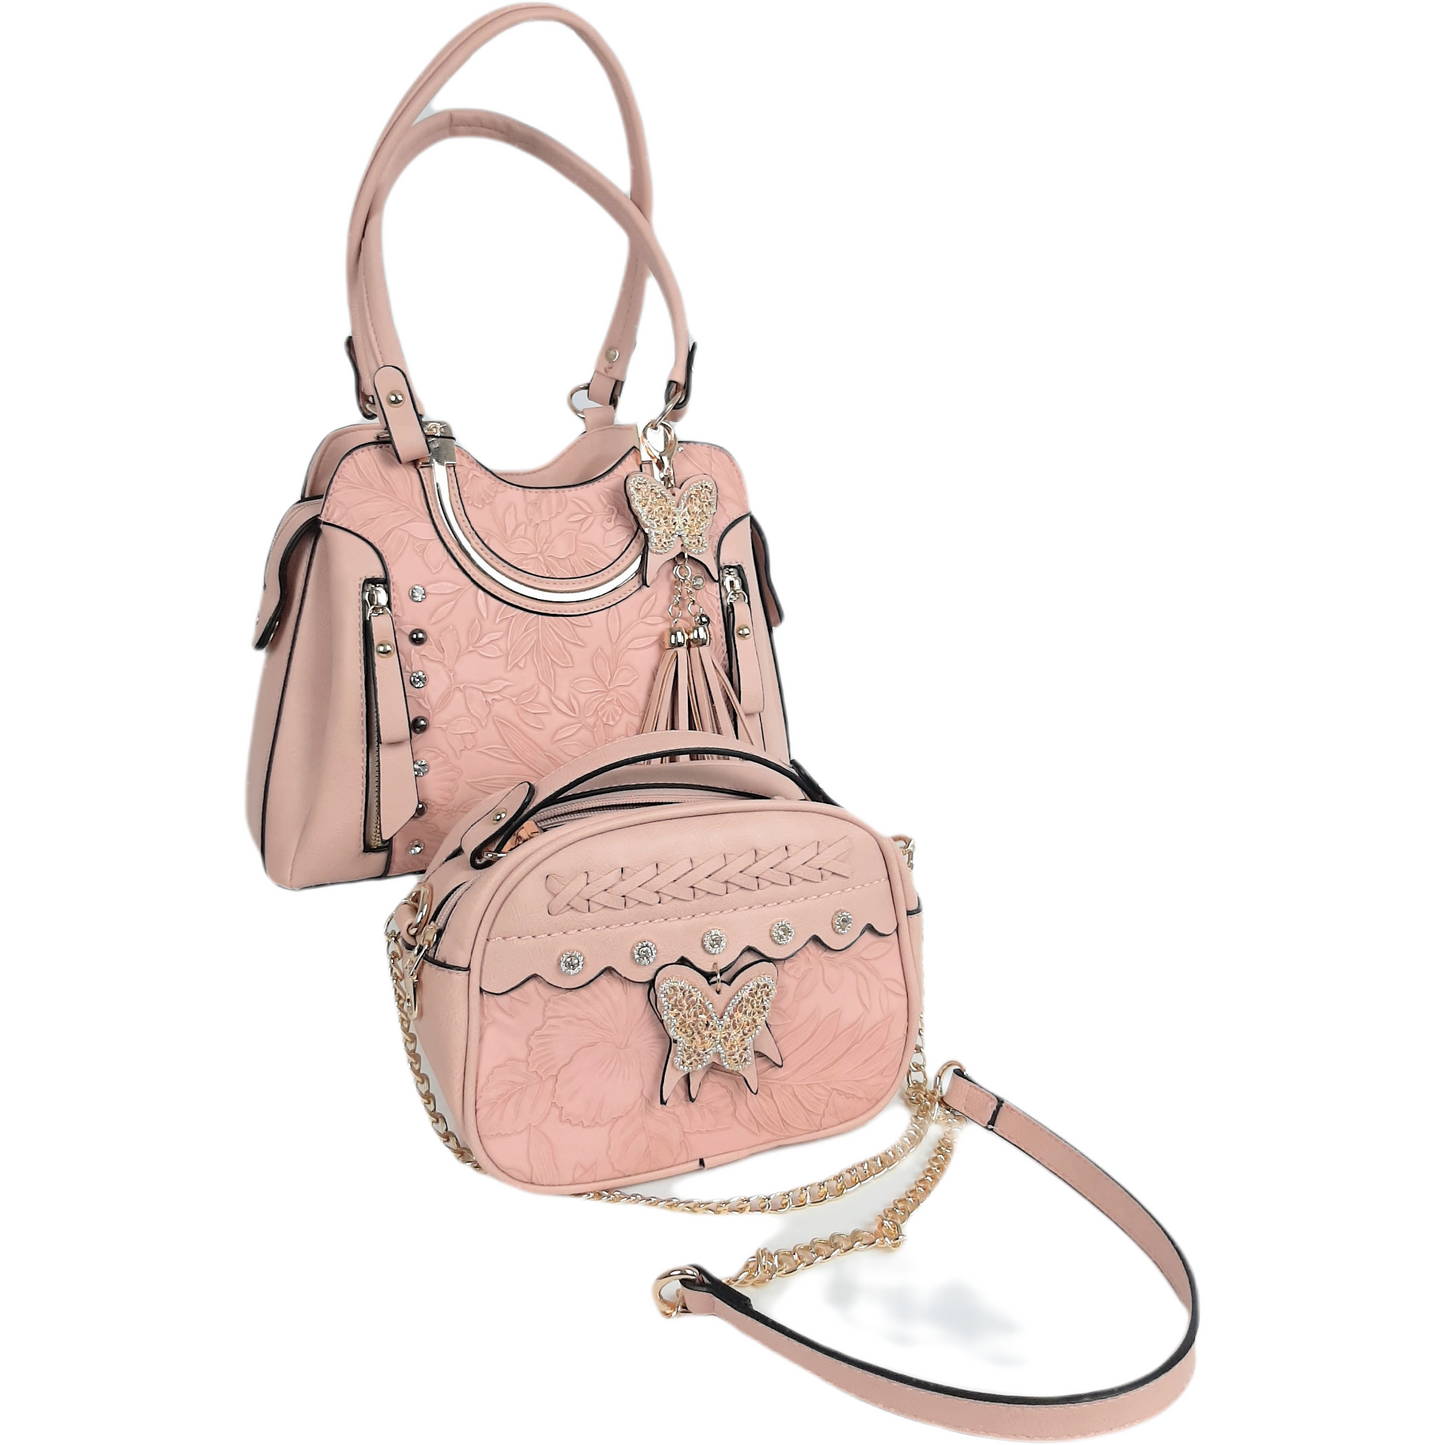 Two handbags for the price of one!  Stylish blush handbag with embossed leaf pattern, tassels, crystal detail and gold tone hardware.   Optional shoulder strap.